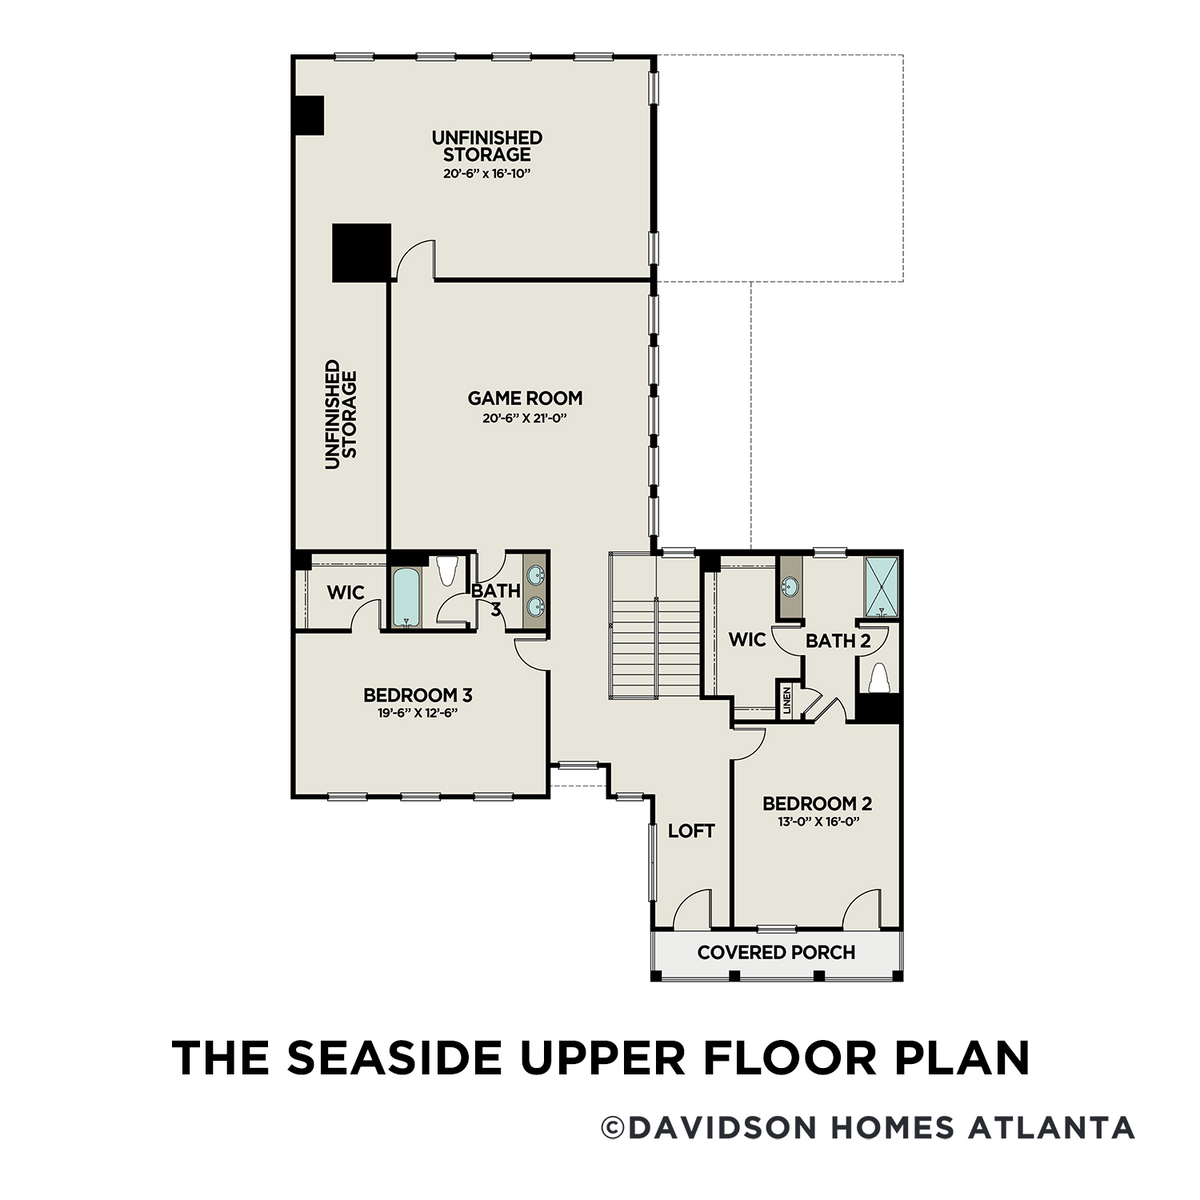 2 - The Seaside C floor plan layout for 87 Batten Board Way in Davidson Homes' The Village at Towne Lake community.